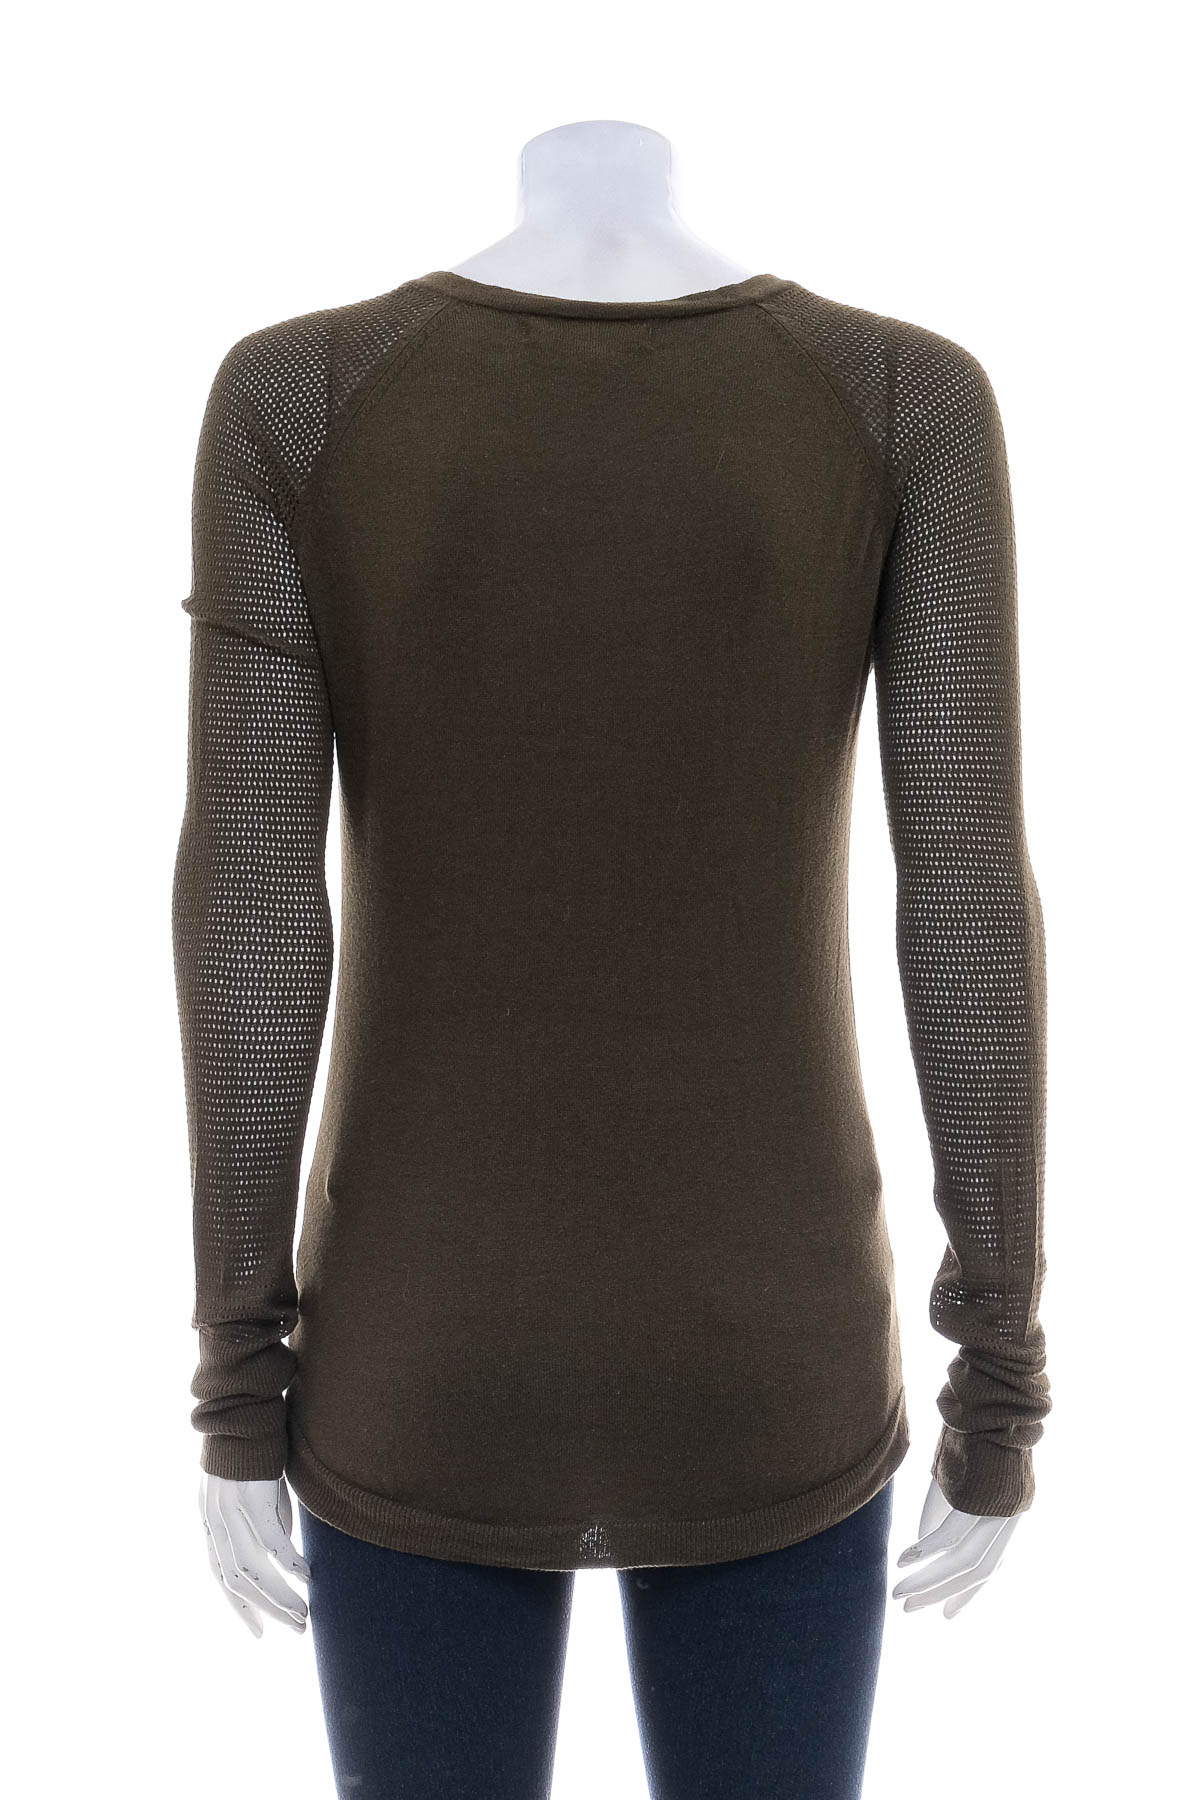 Women's sweater - Kaisely - 1